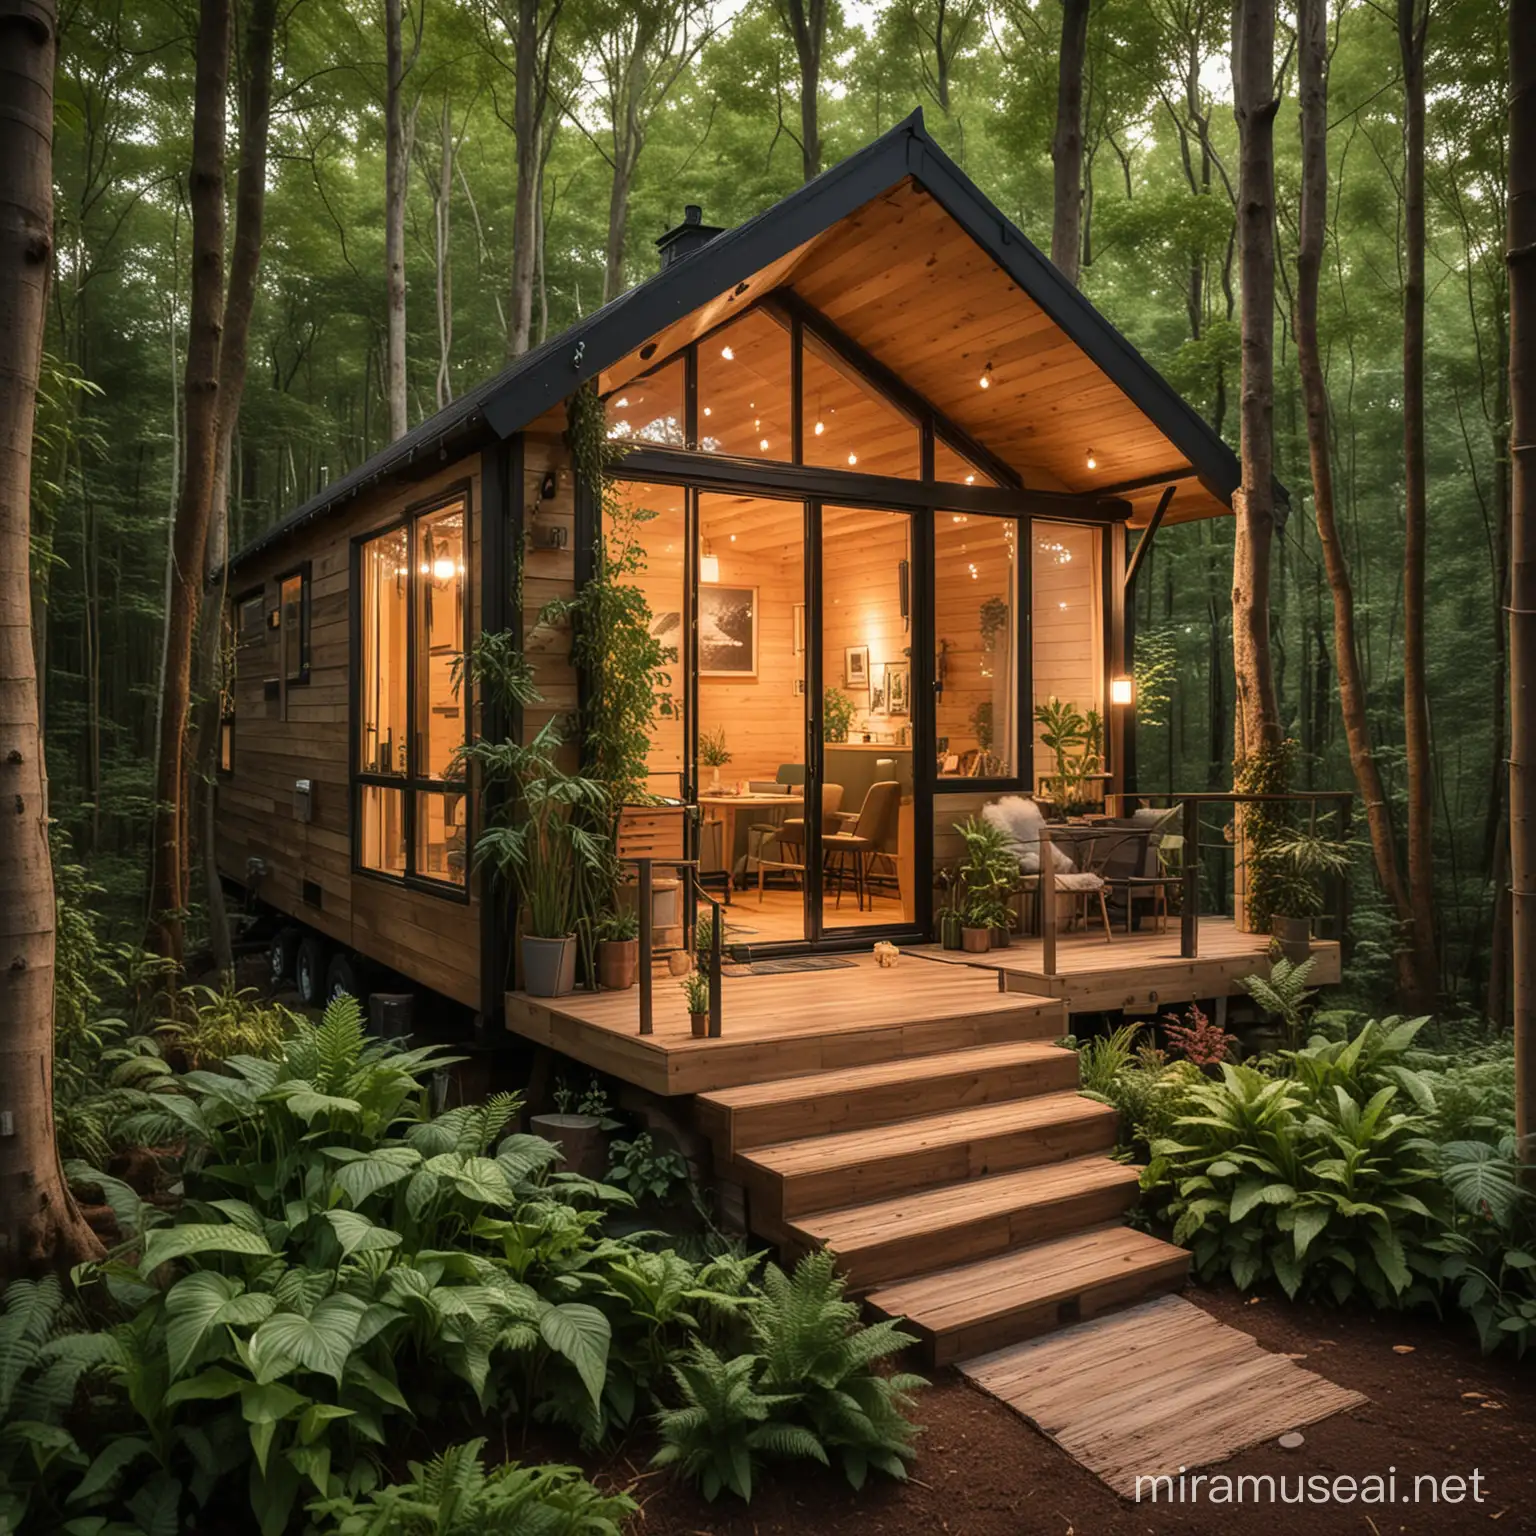 A cozy, eco-friendly tiny home nestled in a serene forest, adorned with lush green plants and warm lighting that illuminates its wooden exterior.